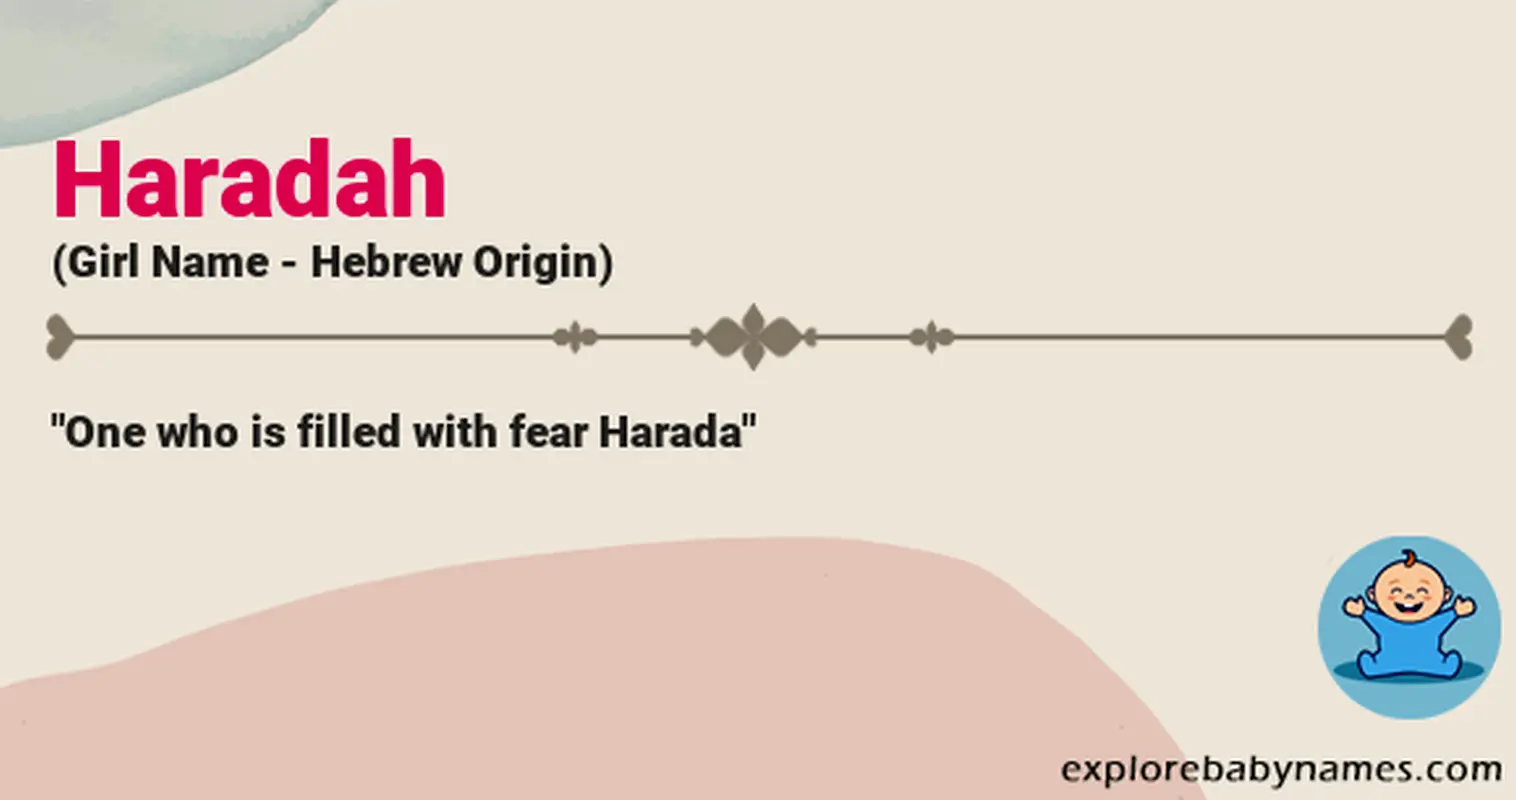 Meaning of Haradah